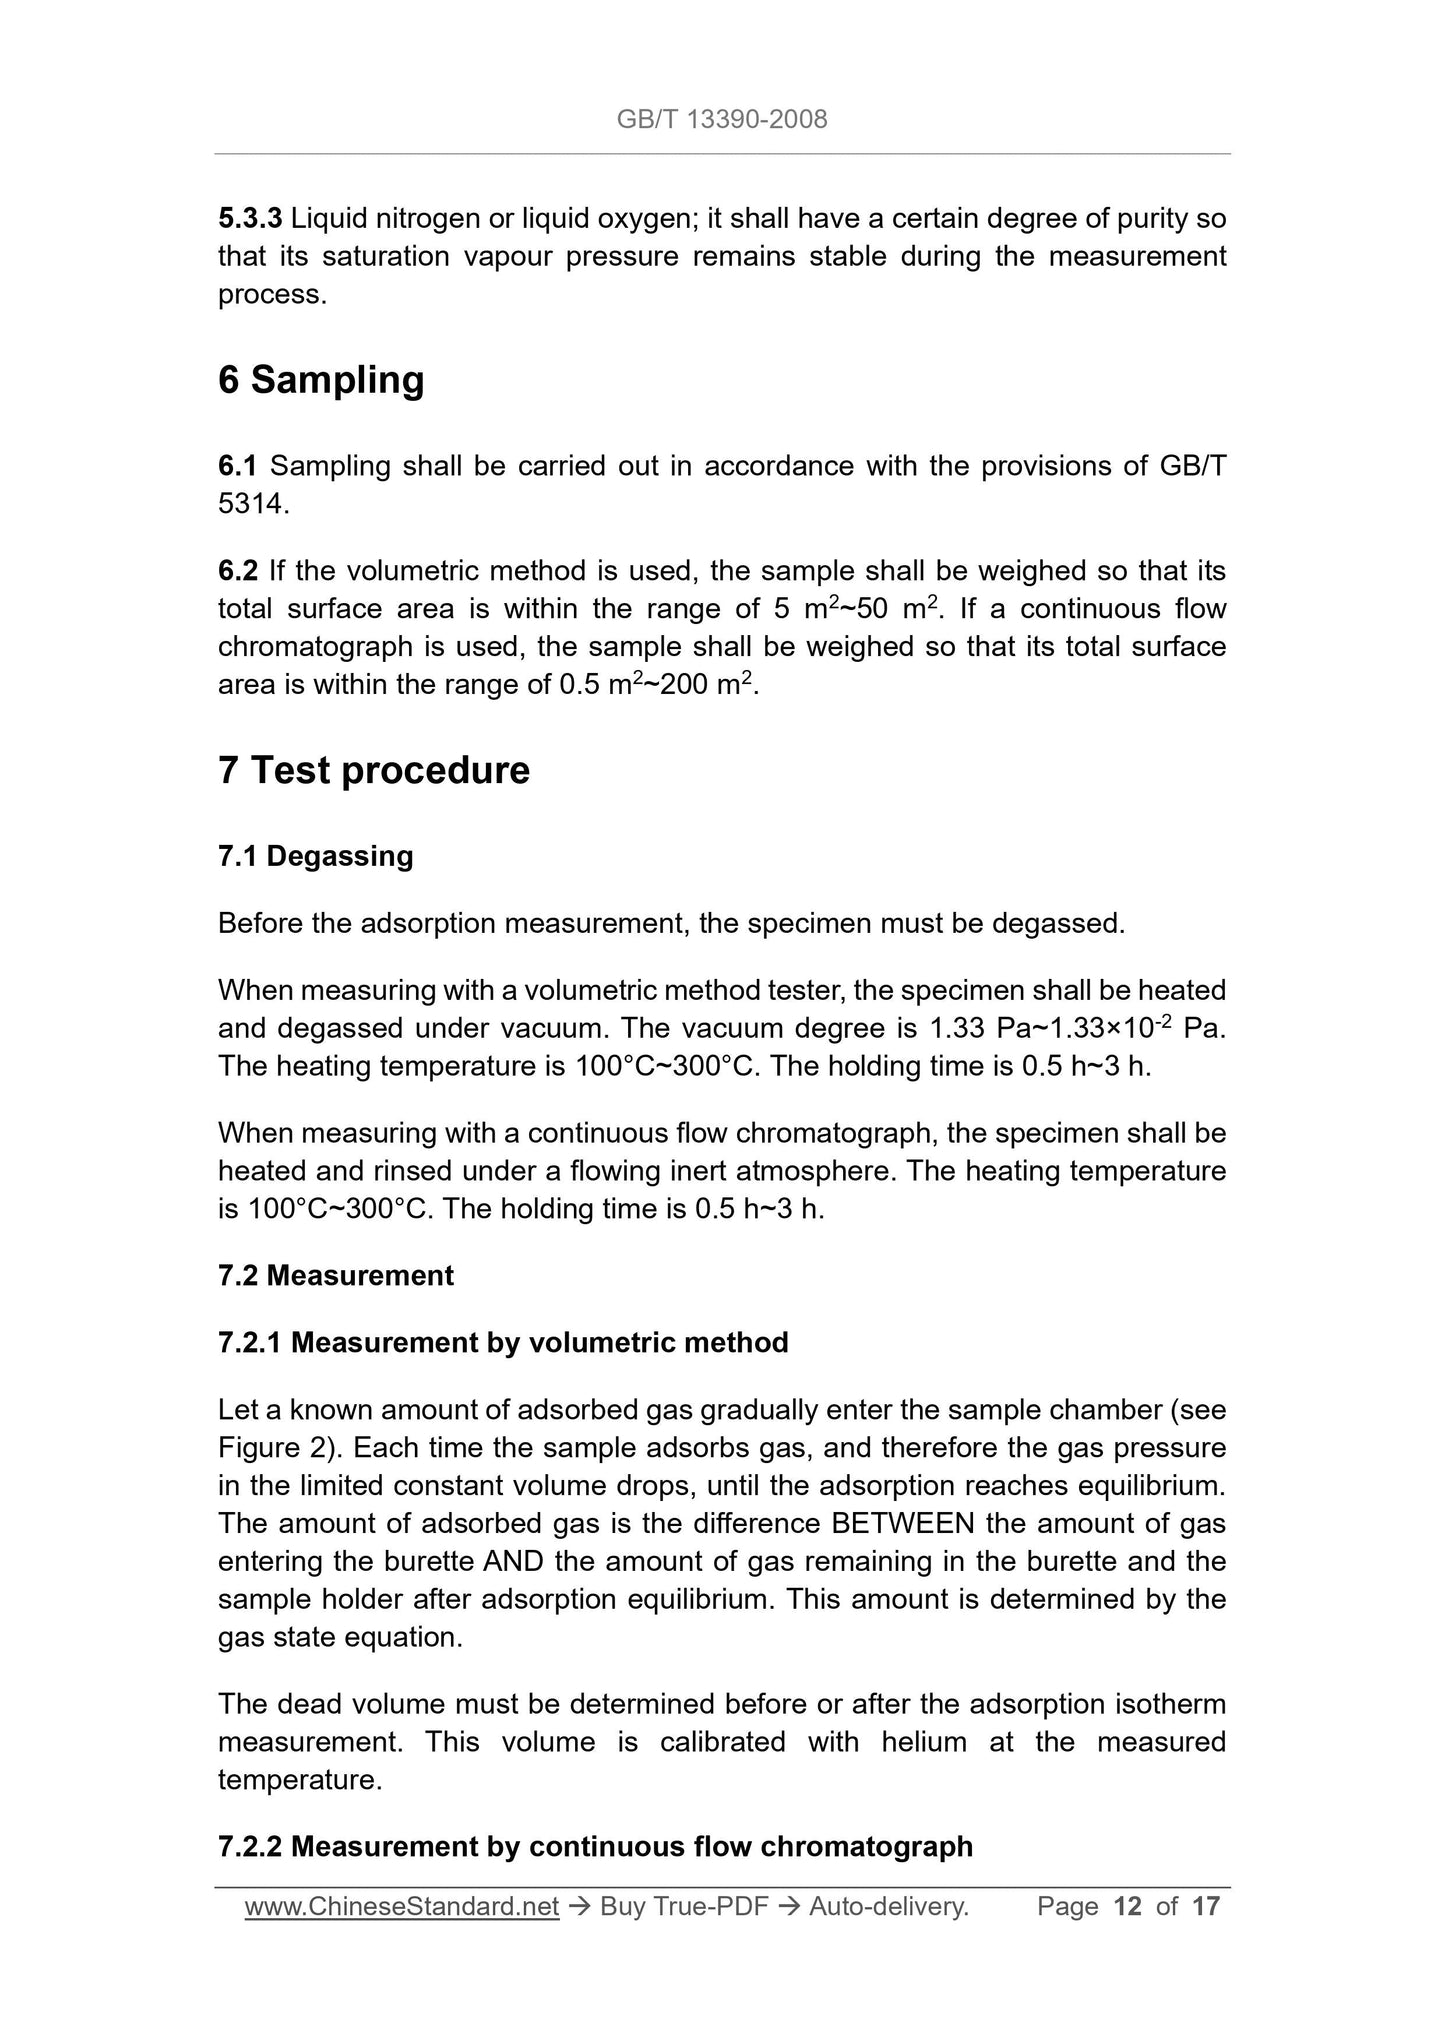 GB/T 13390-2008 Page 5